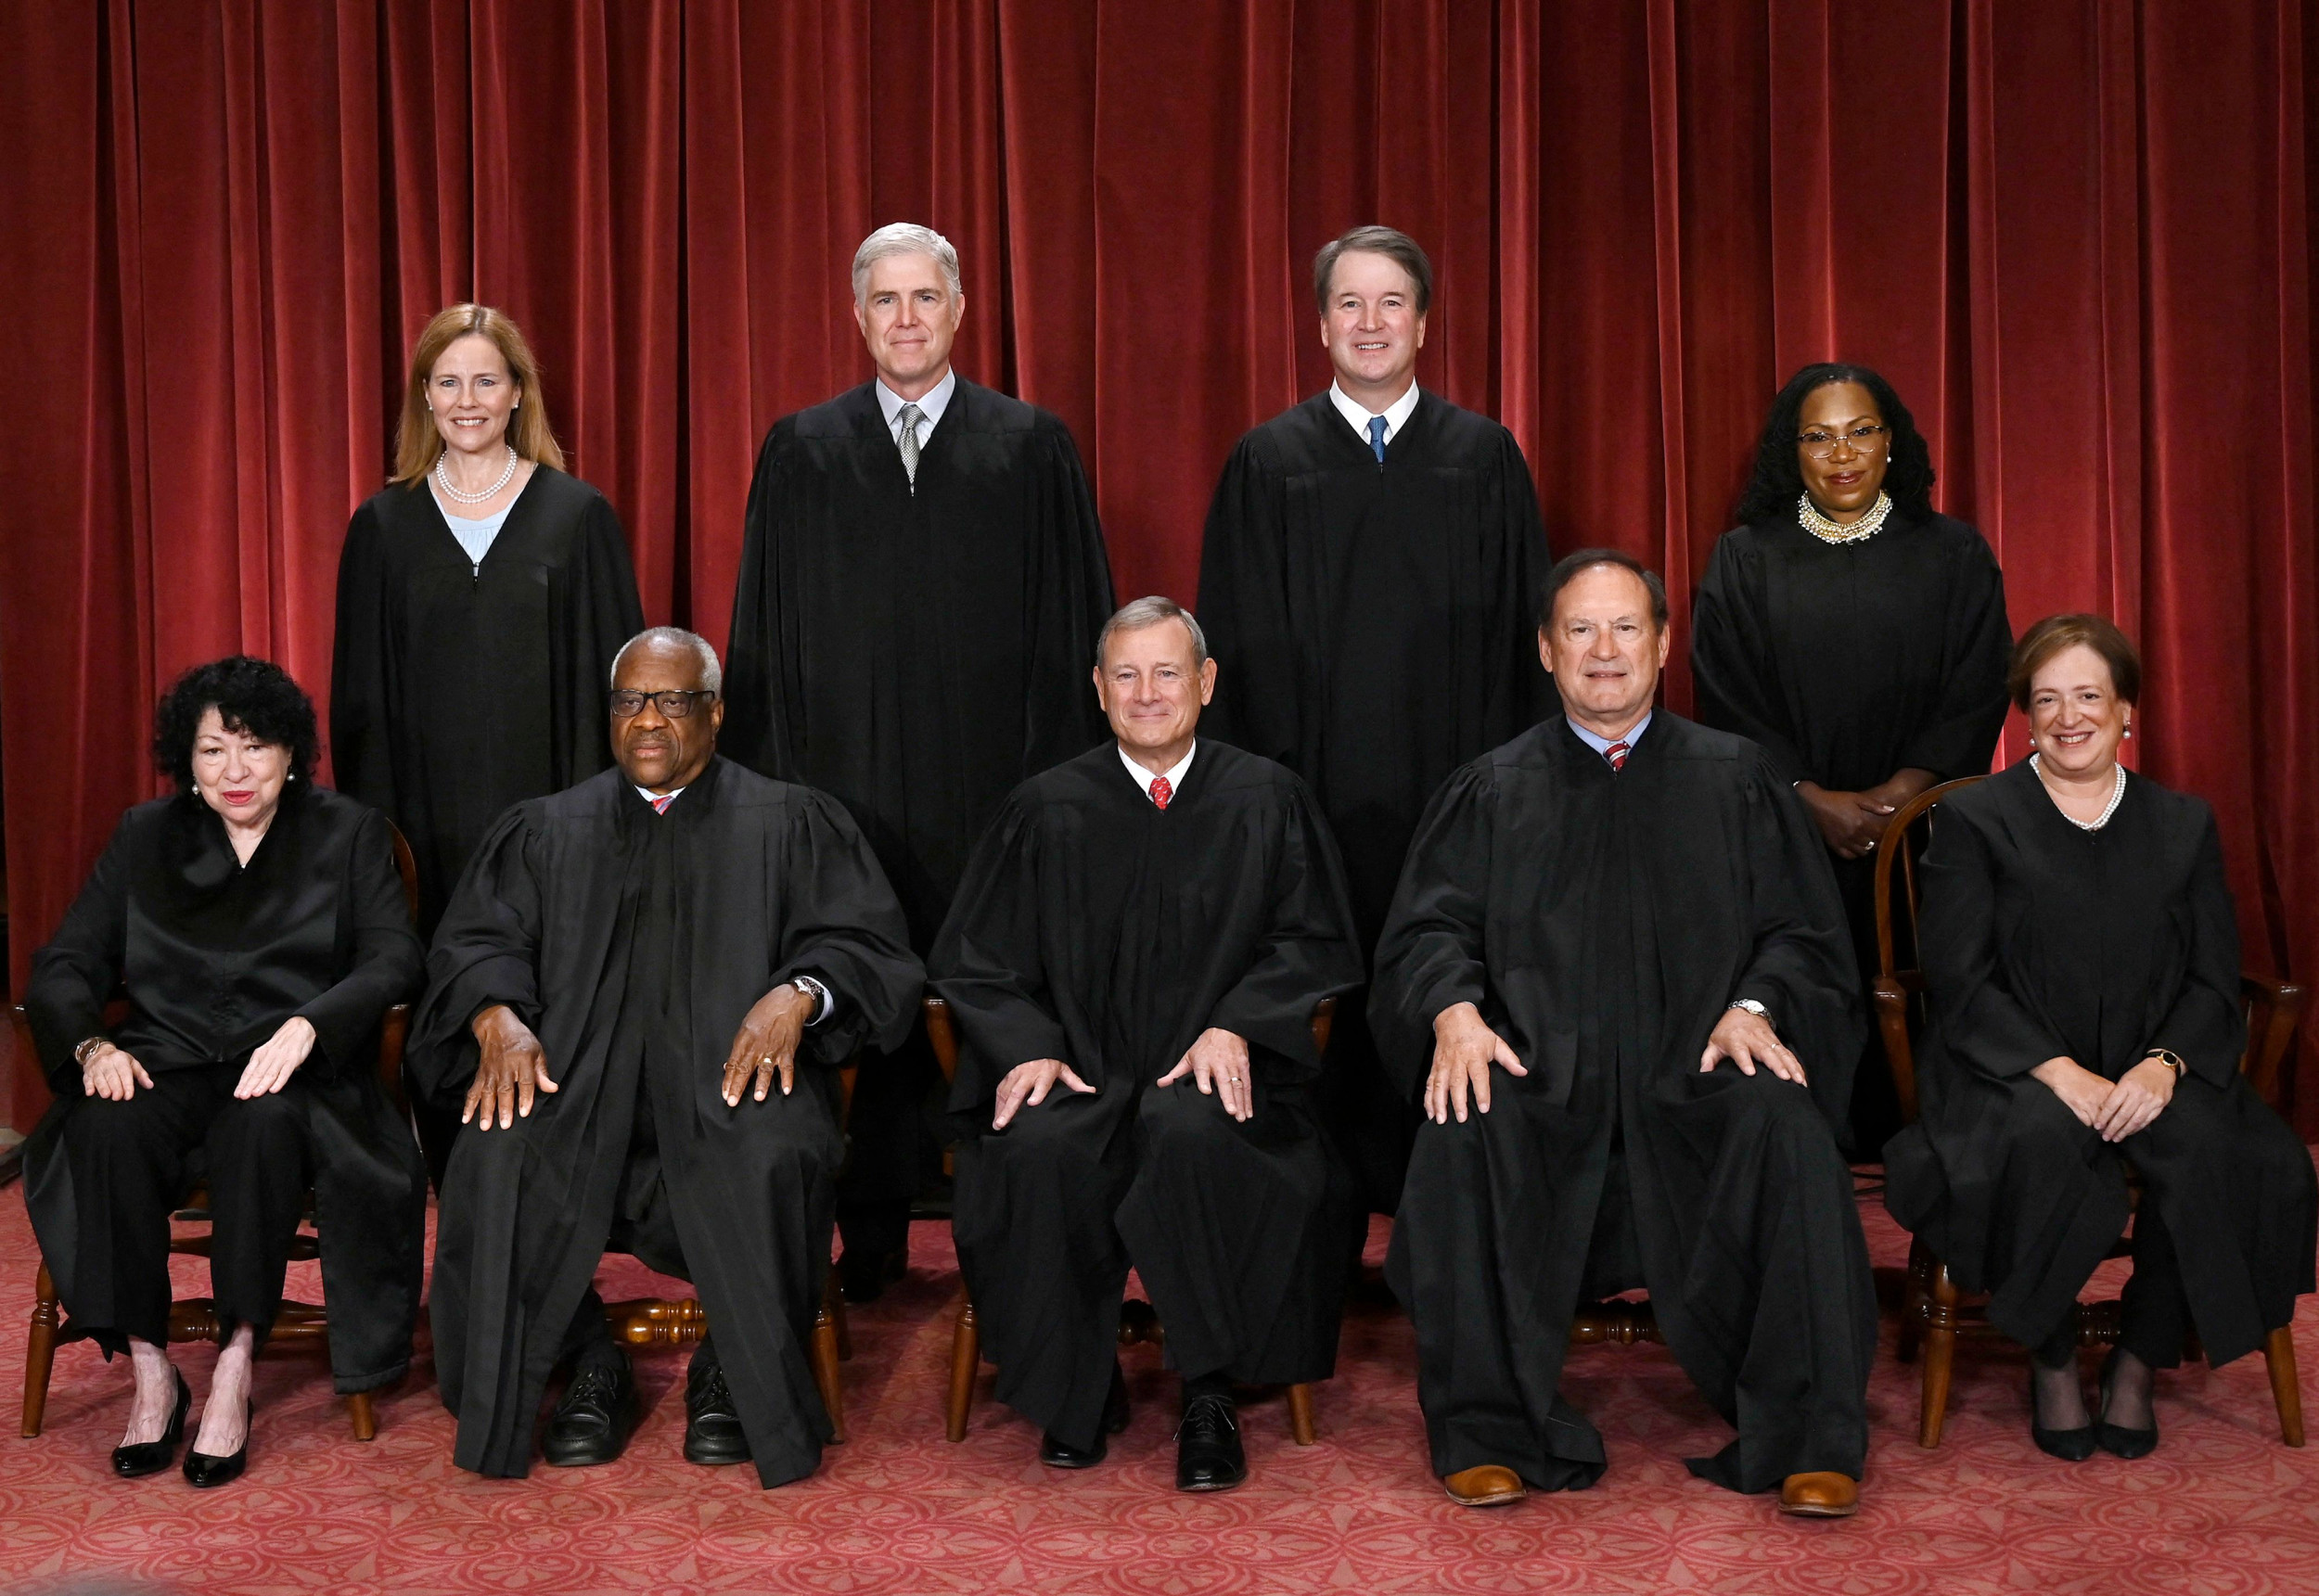 Supreme Court Faces HighStakes Cases What to Know